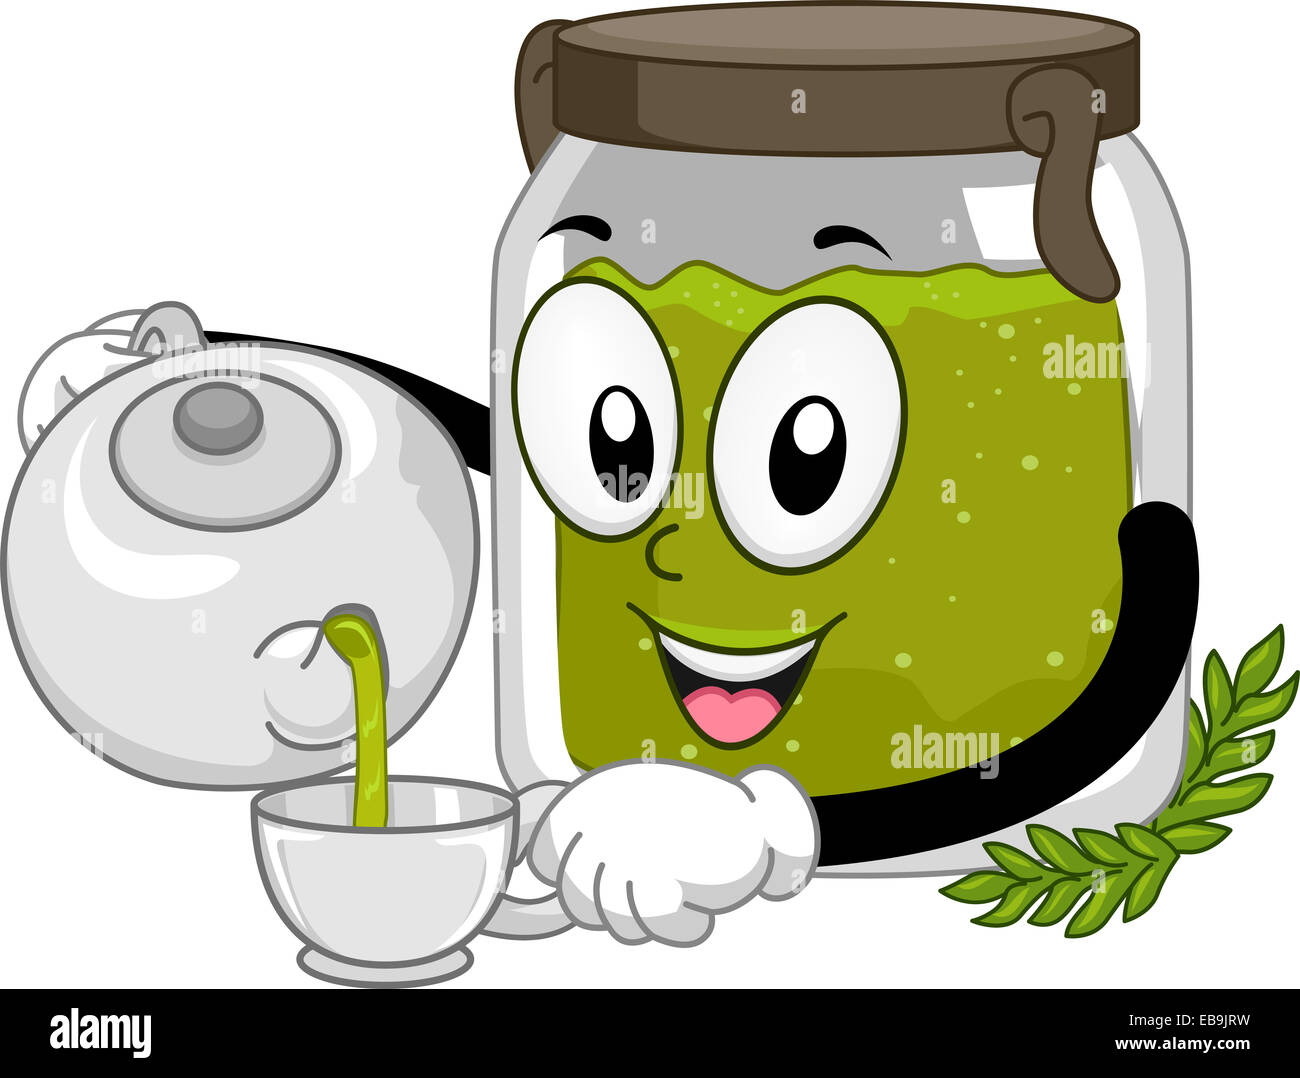 Mascot Illustration Featuring a Canister of Organic Tea Pouring Tea Into a Cup Stock Photo